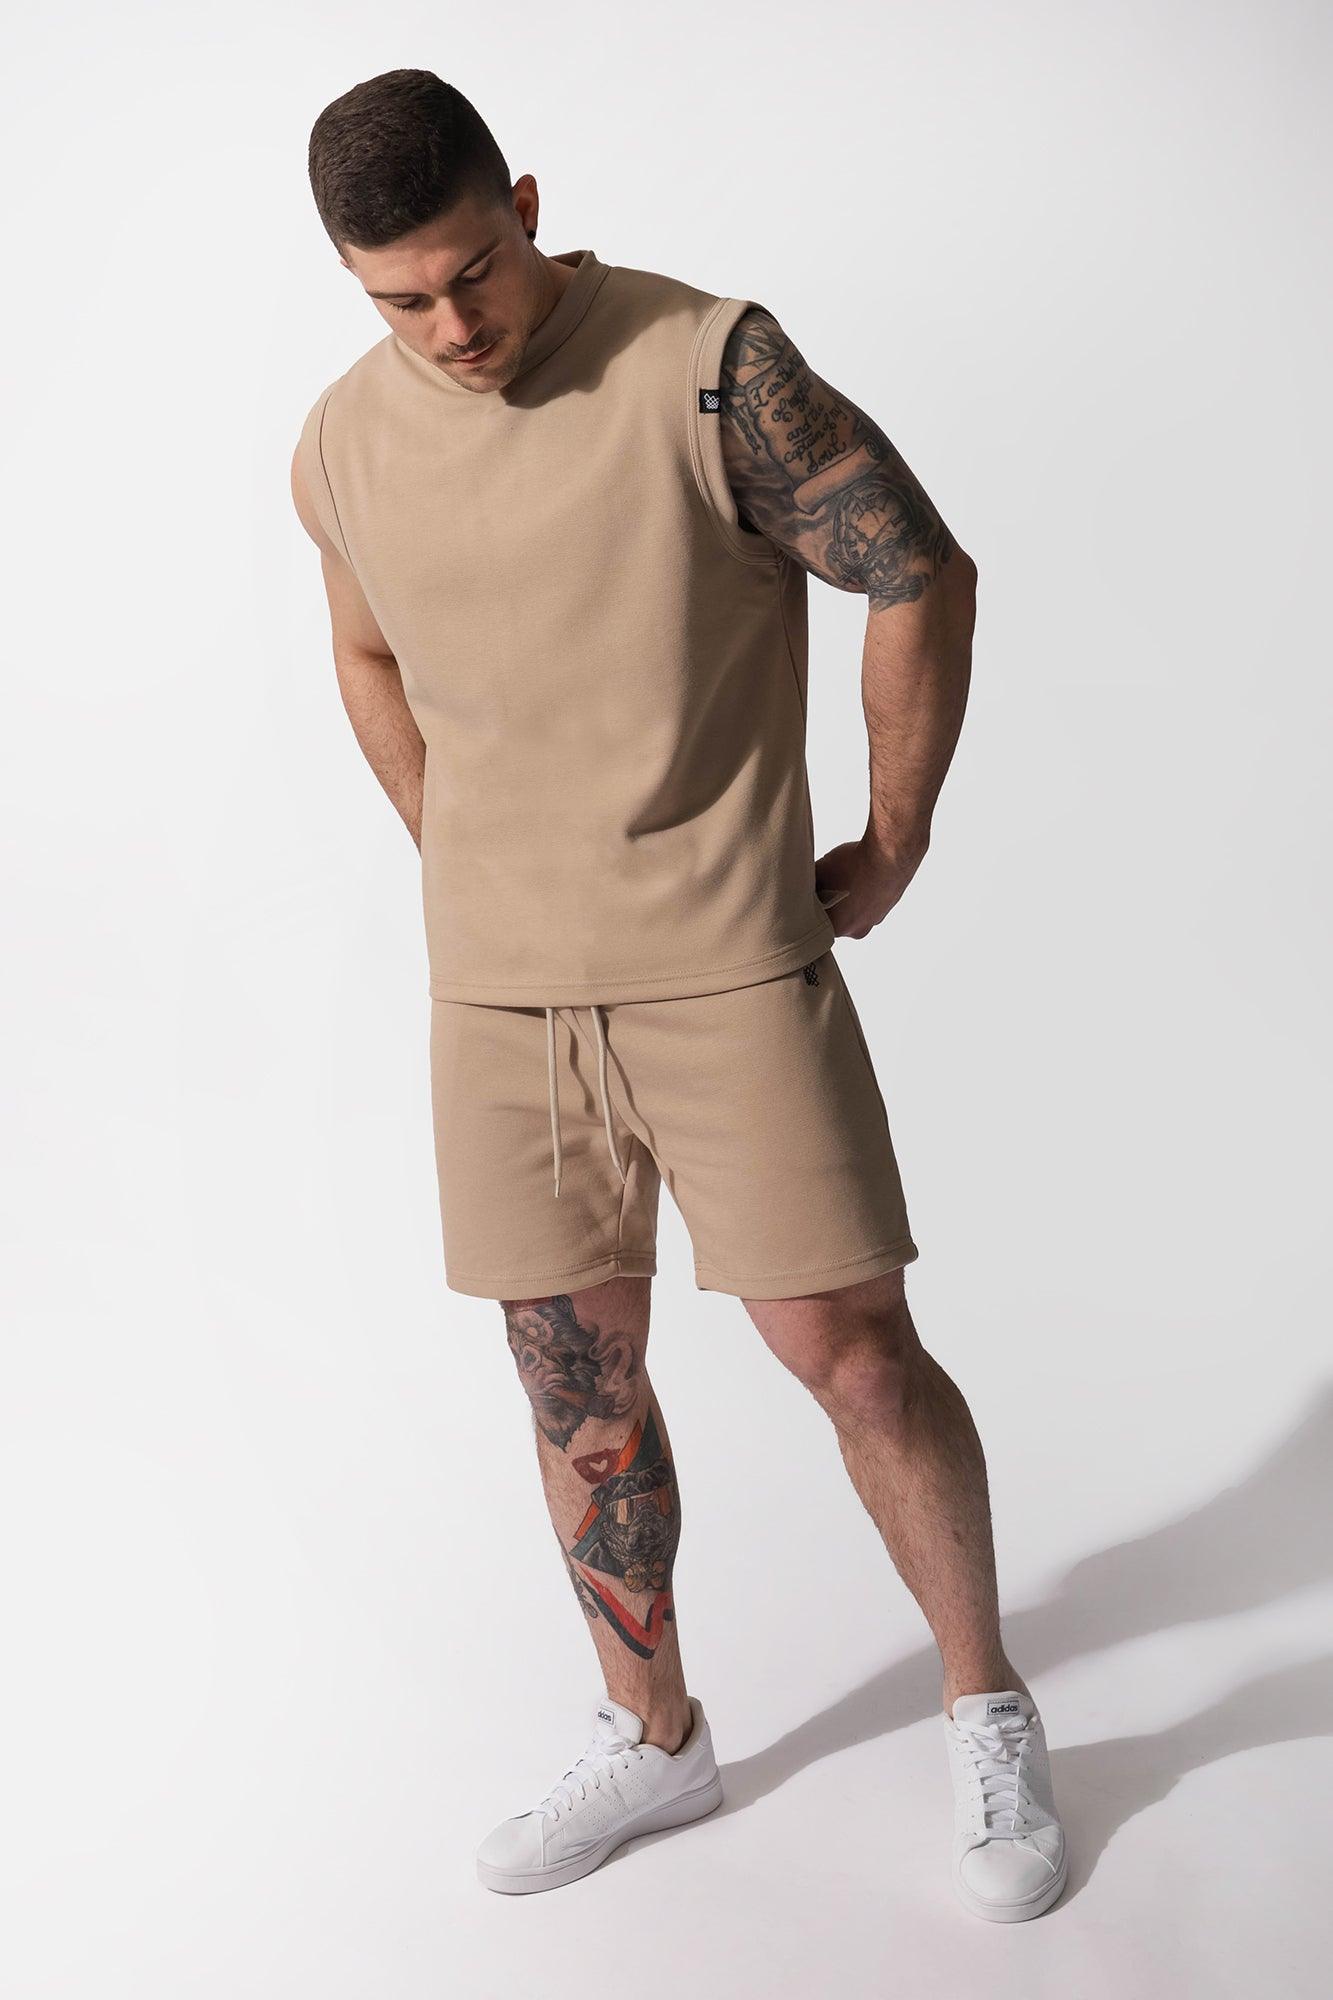 Amplify Casual Muscle Tee - Khaki - Jed North